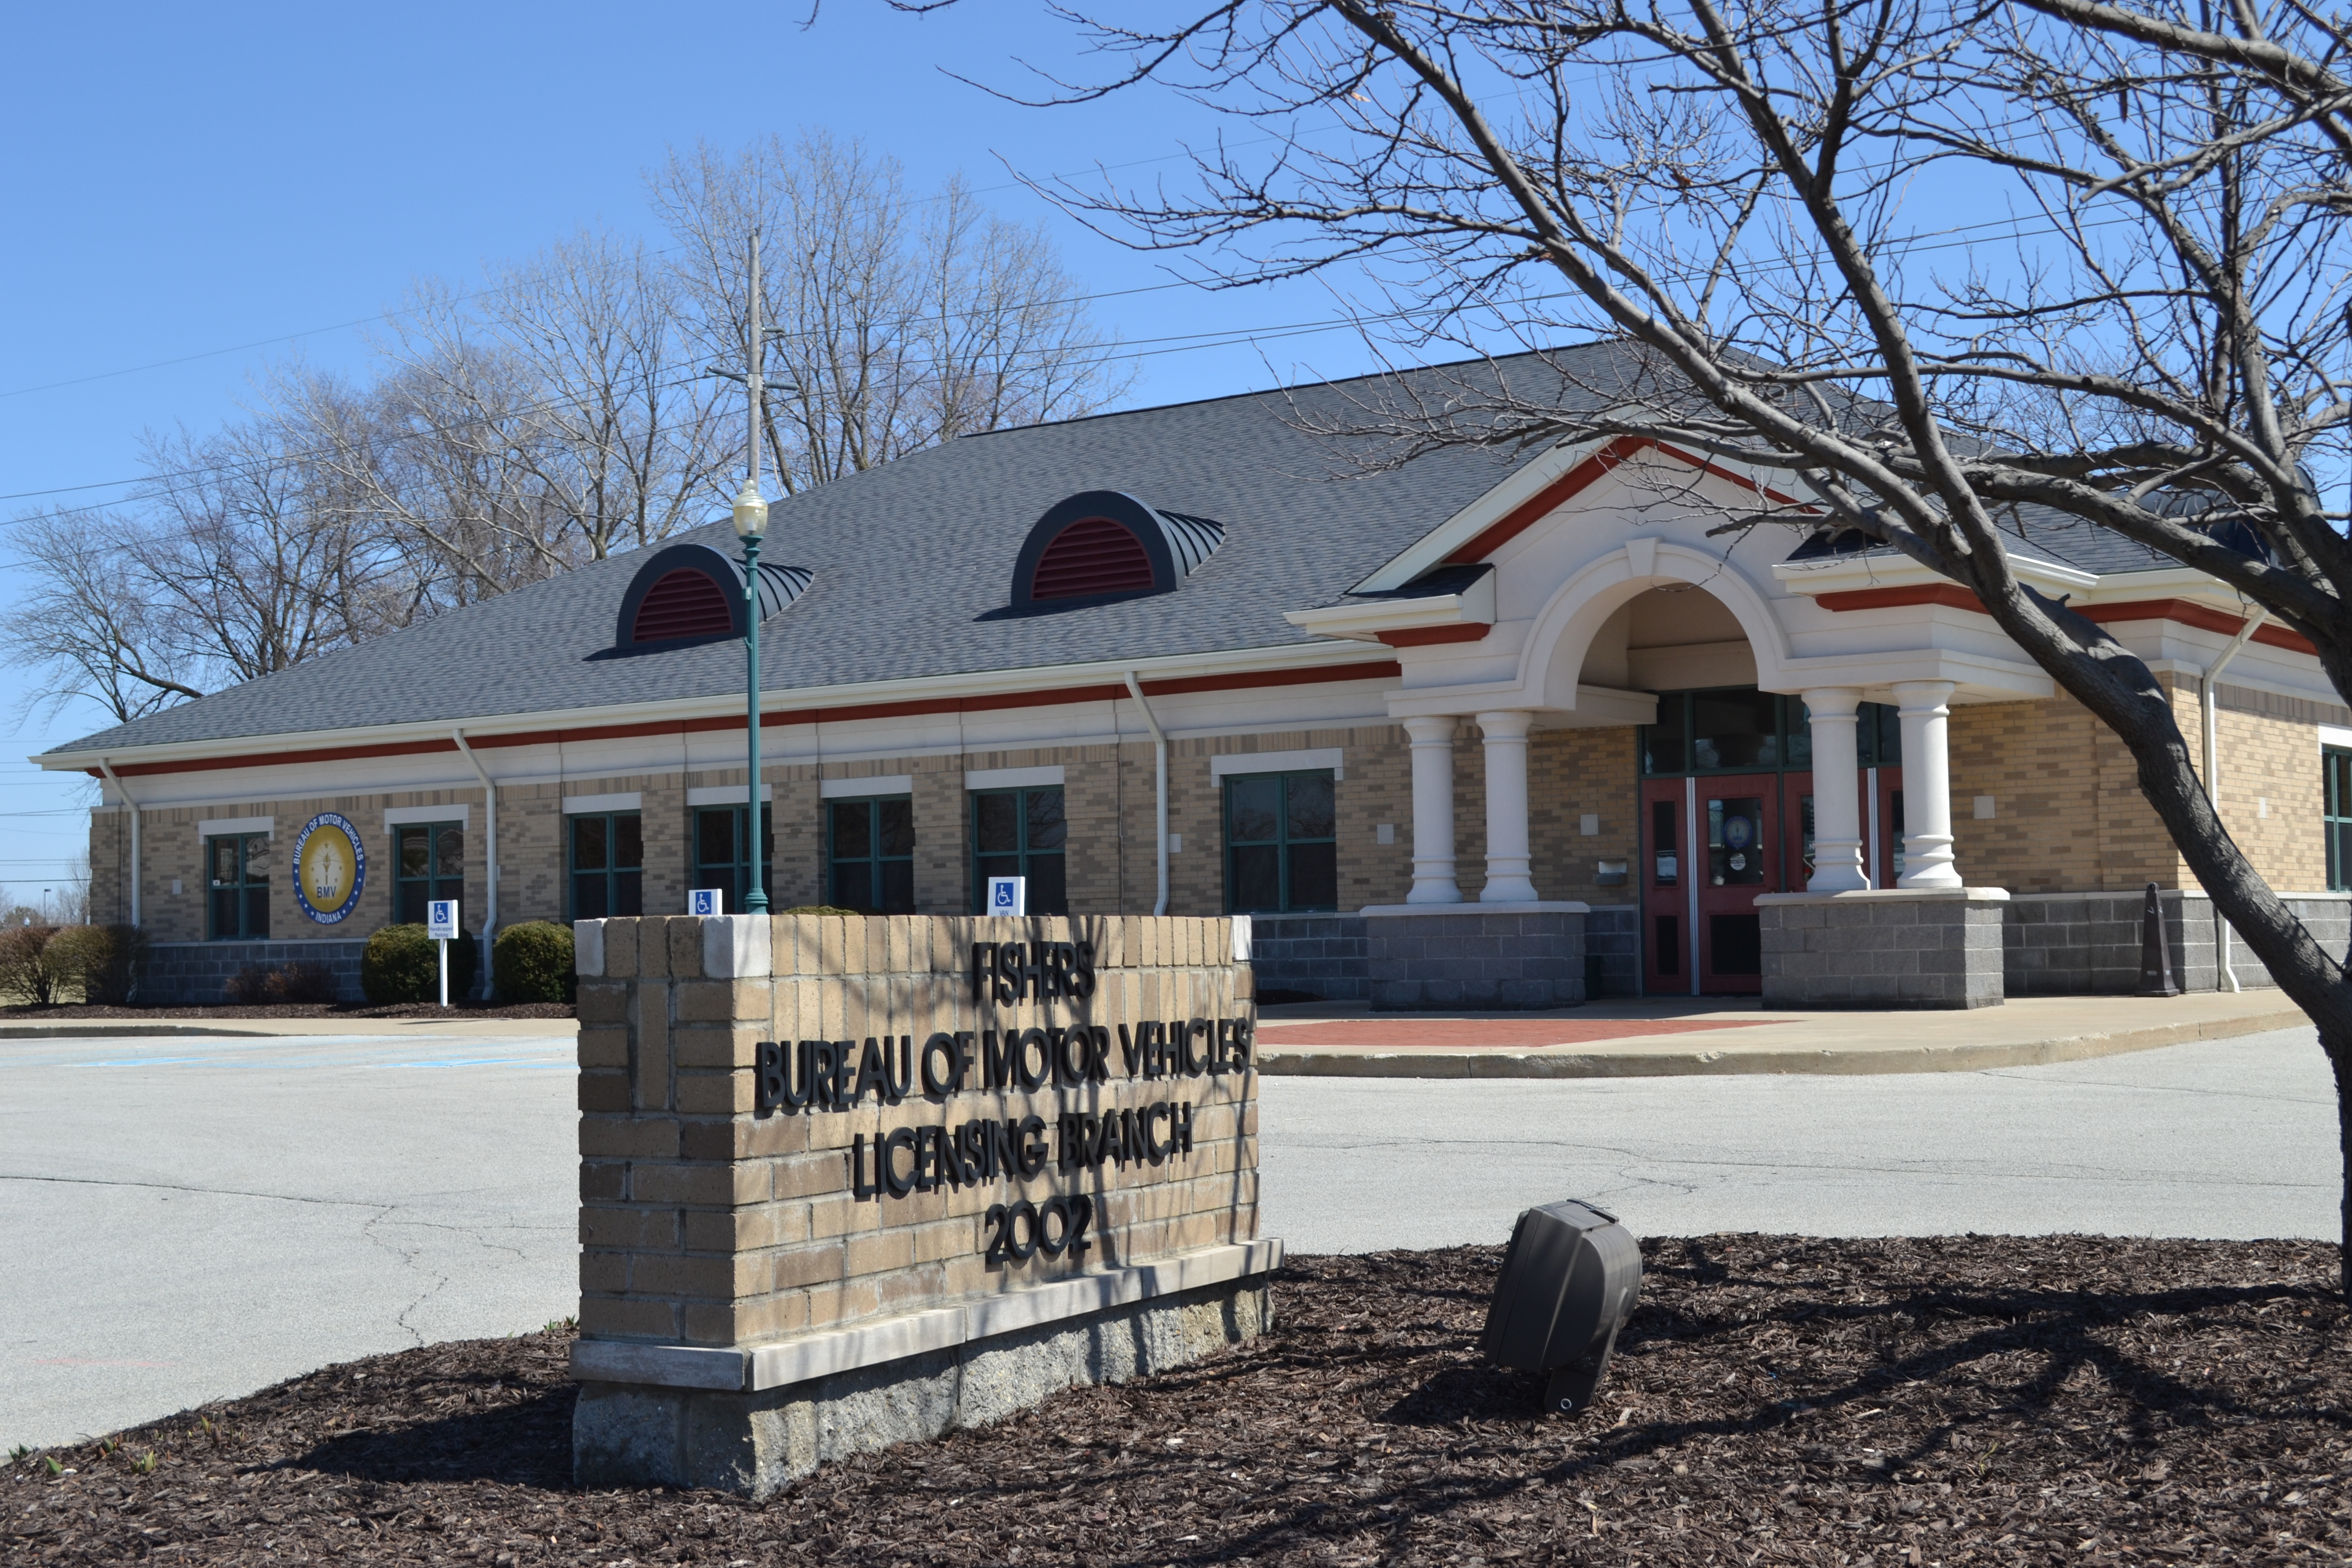 The Fishers BMV at 3 Municipal Drive will close April 26th